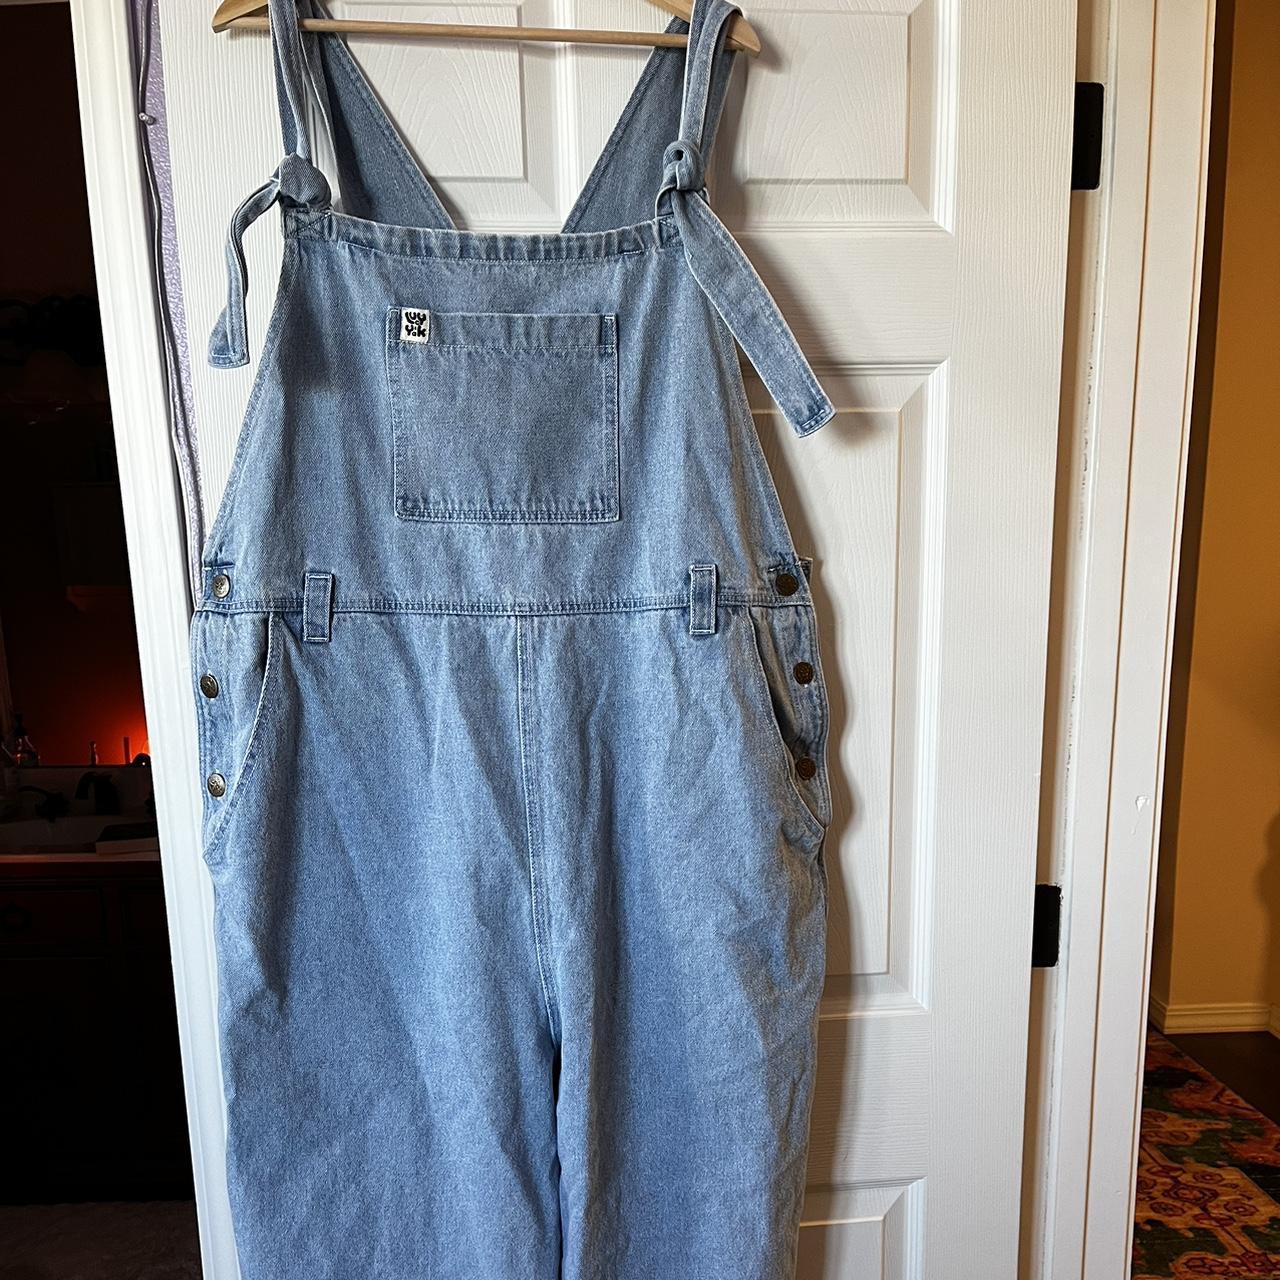 Lucy and Yak Women's Blue and White Dungarees-overalls | Depop